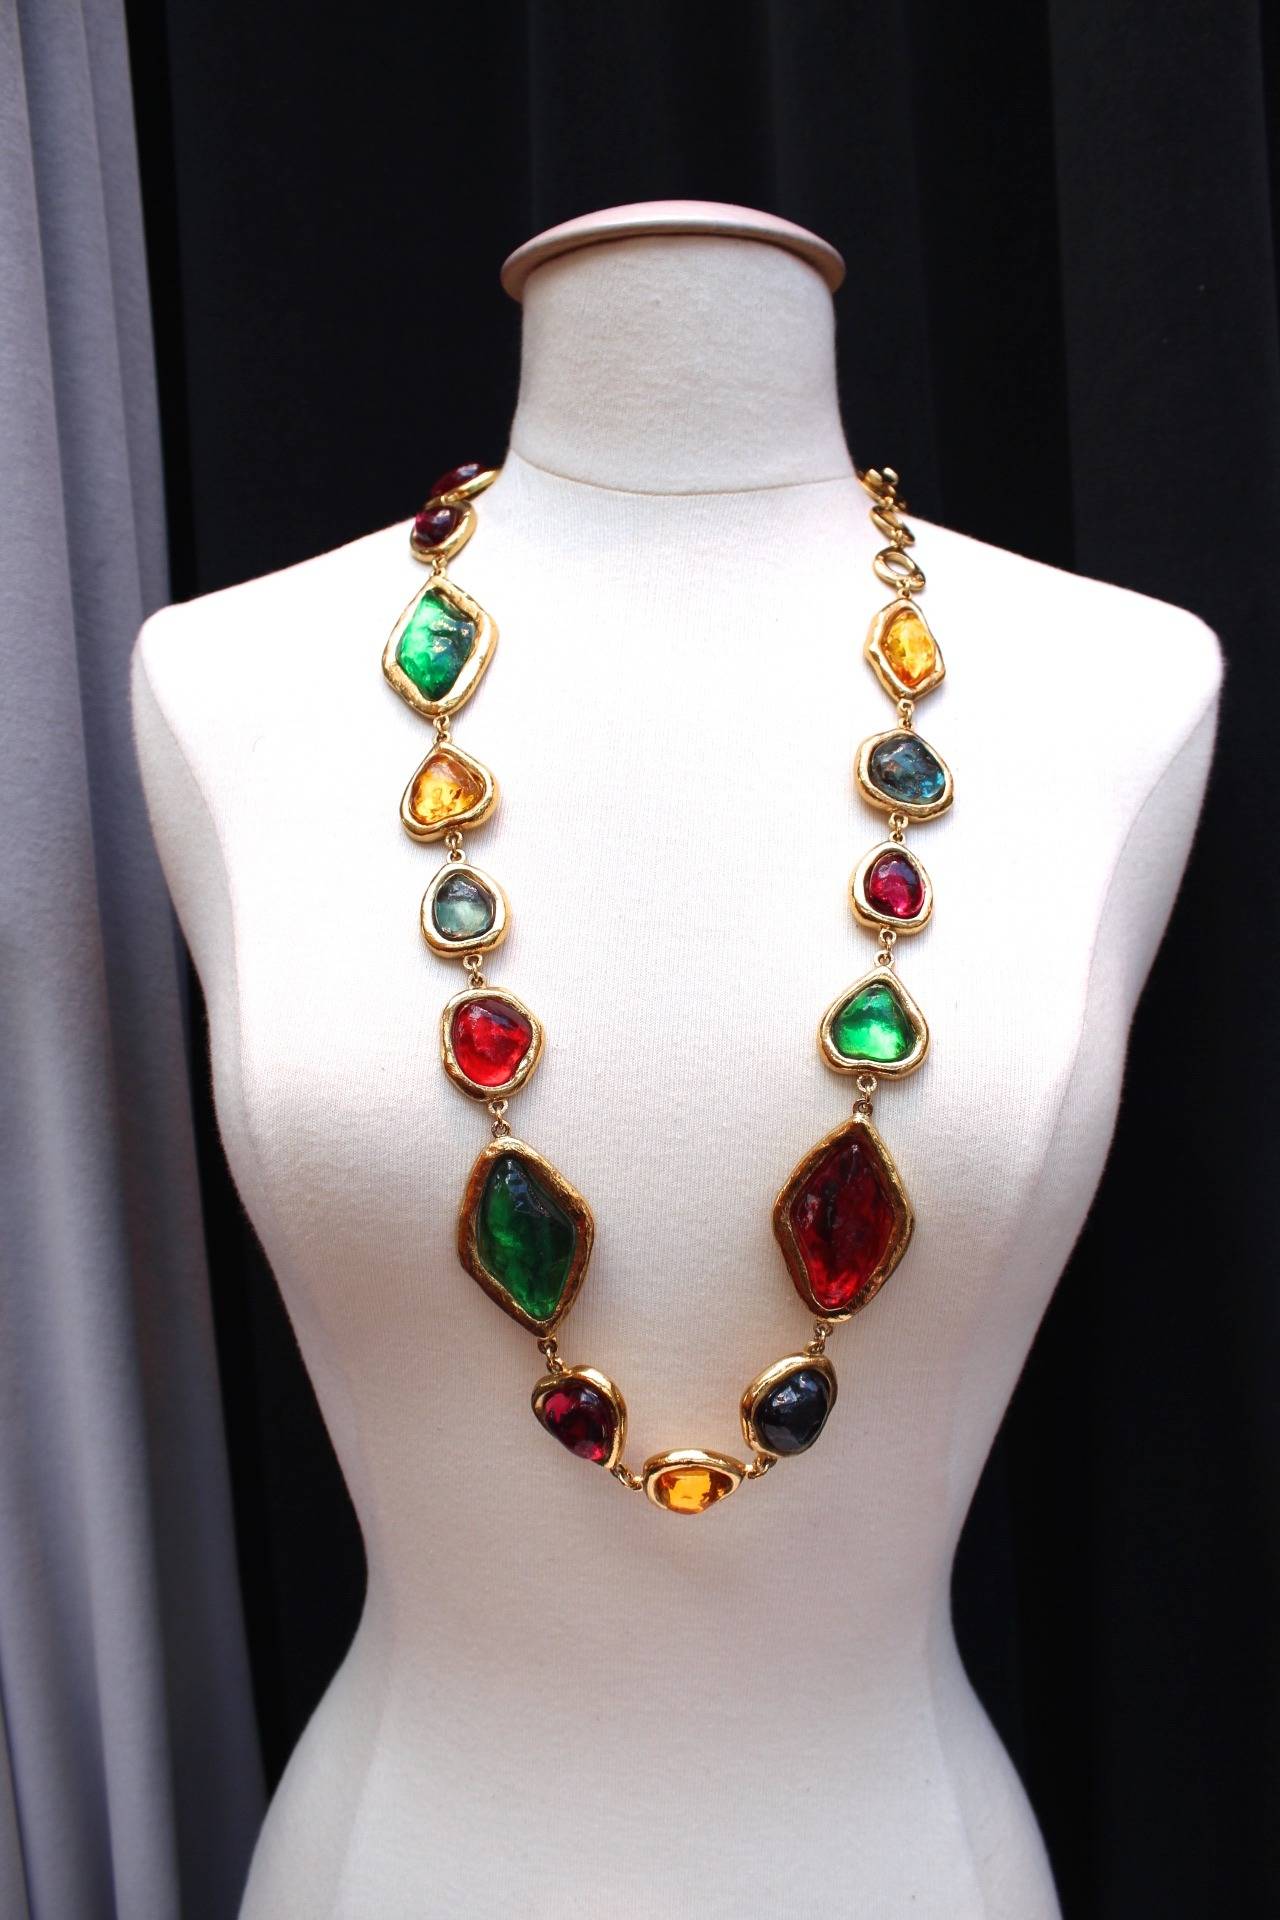 Exceptional Multi-colored necklace of Yves Saint Laurent made by Robert Goossens, circa 1980, composed of a succession of blue, green, yellow, red and orange resin cabochons circled by hammered gold metal. 
Length adjustable thanks to a toggle